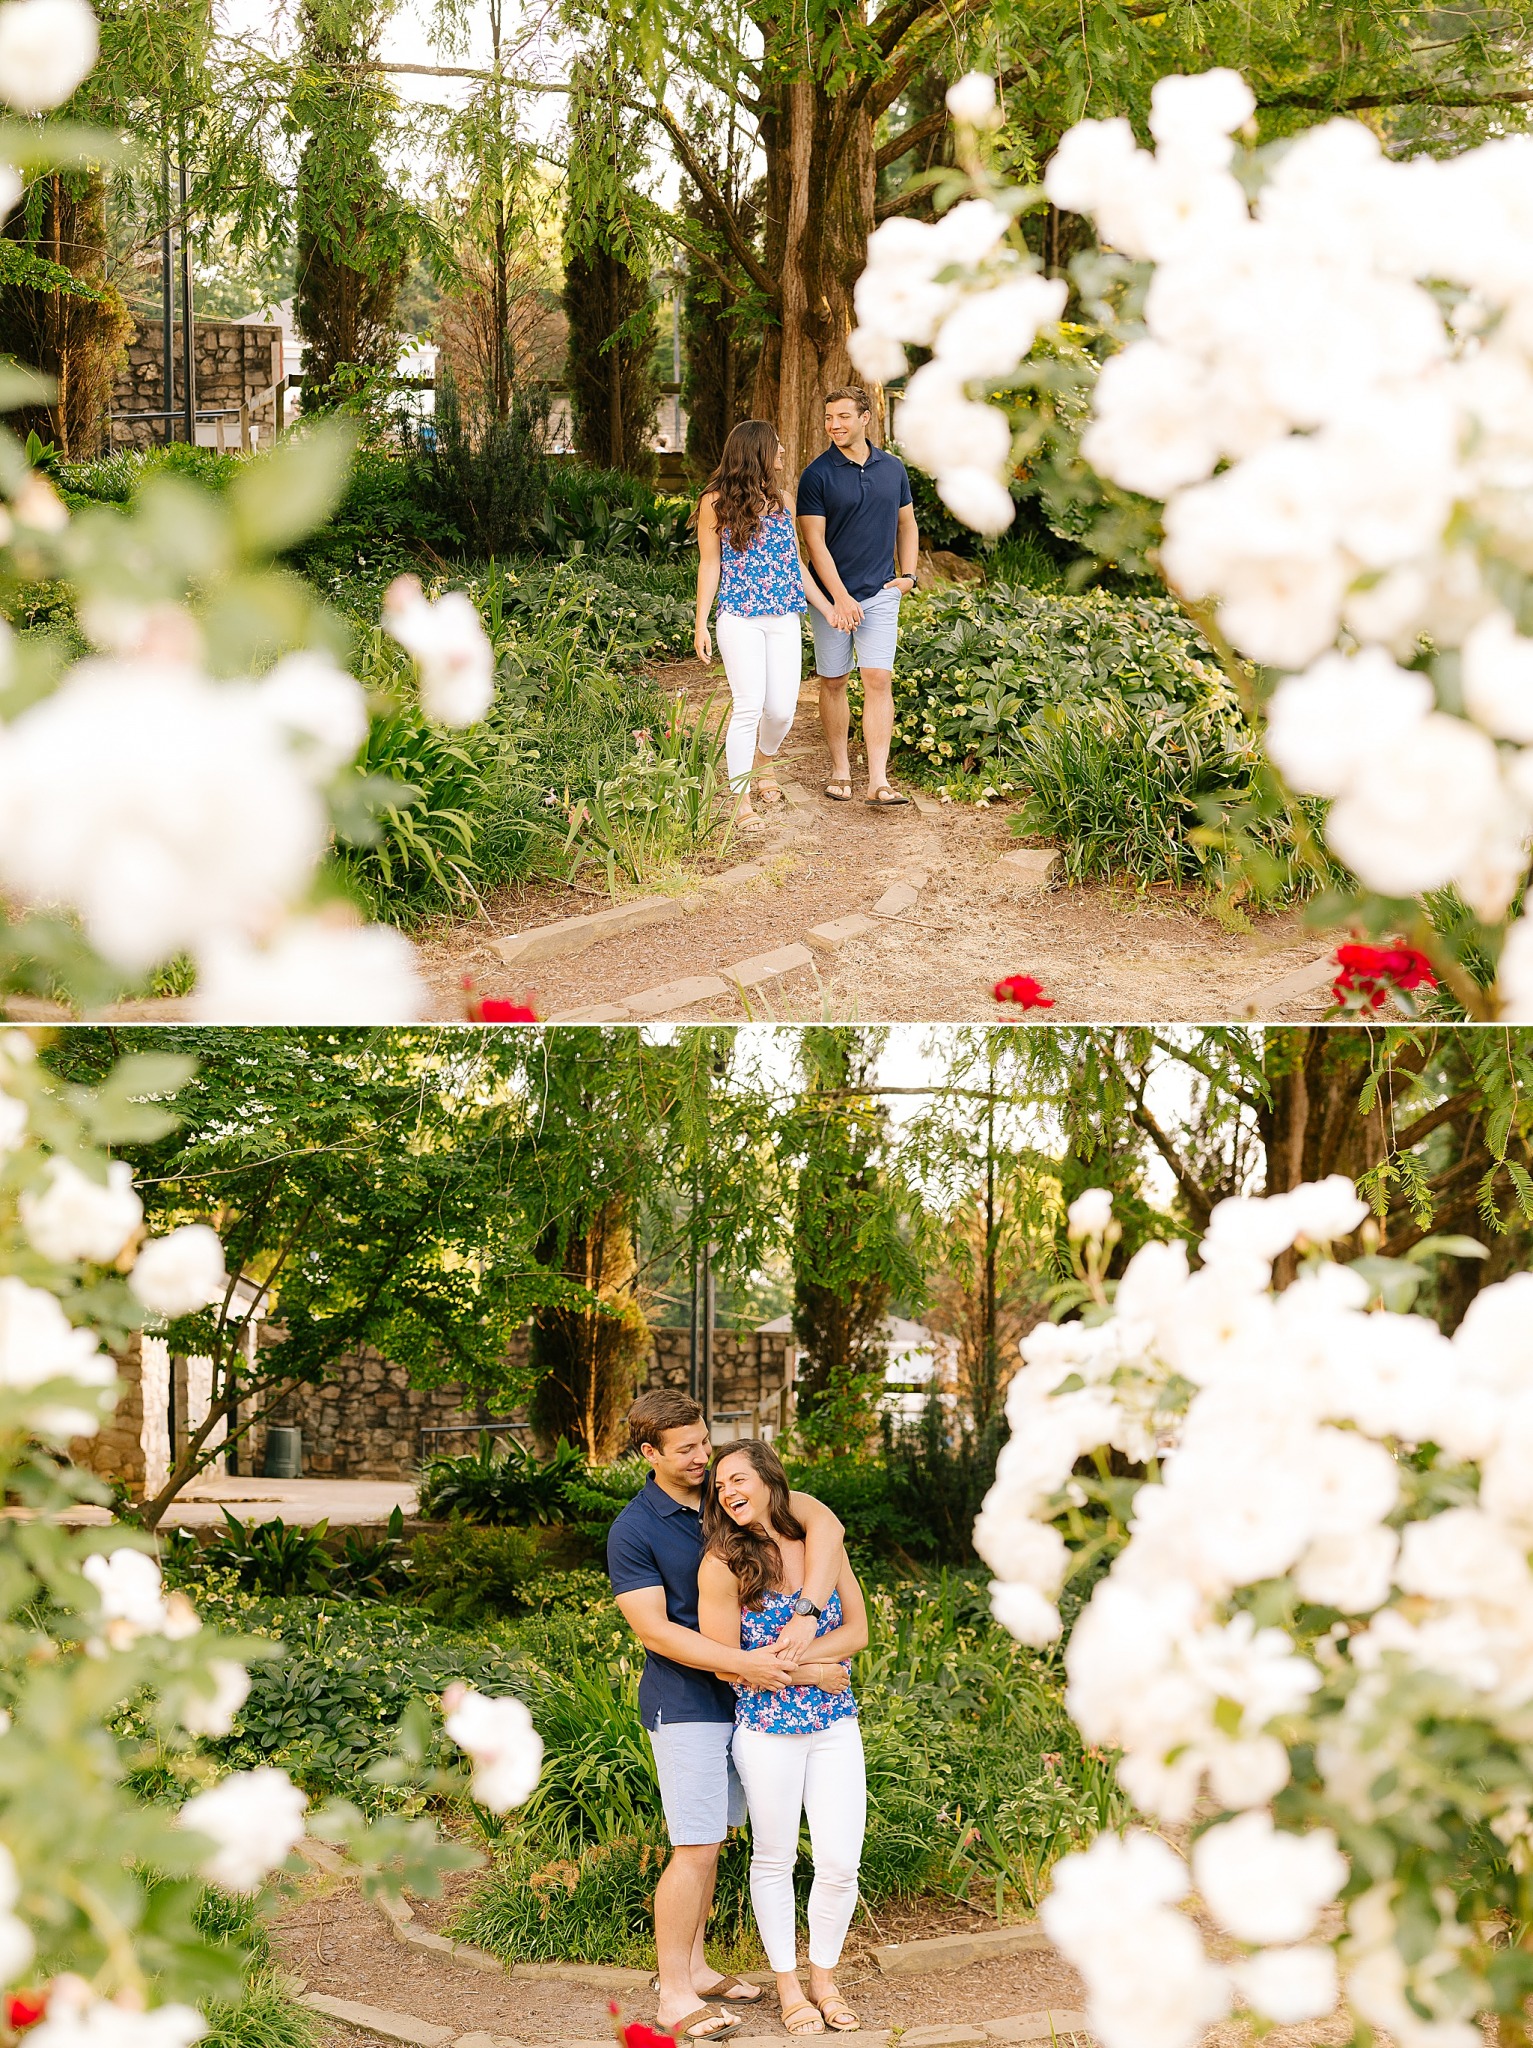 Morgan - Bridal Photography Session at the FTCC Rose Garden in